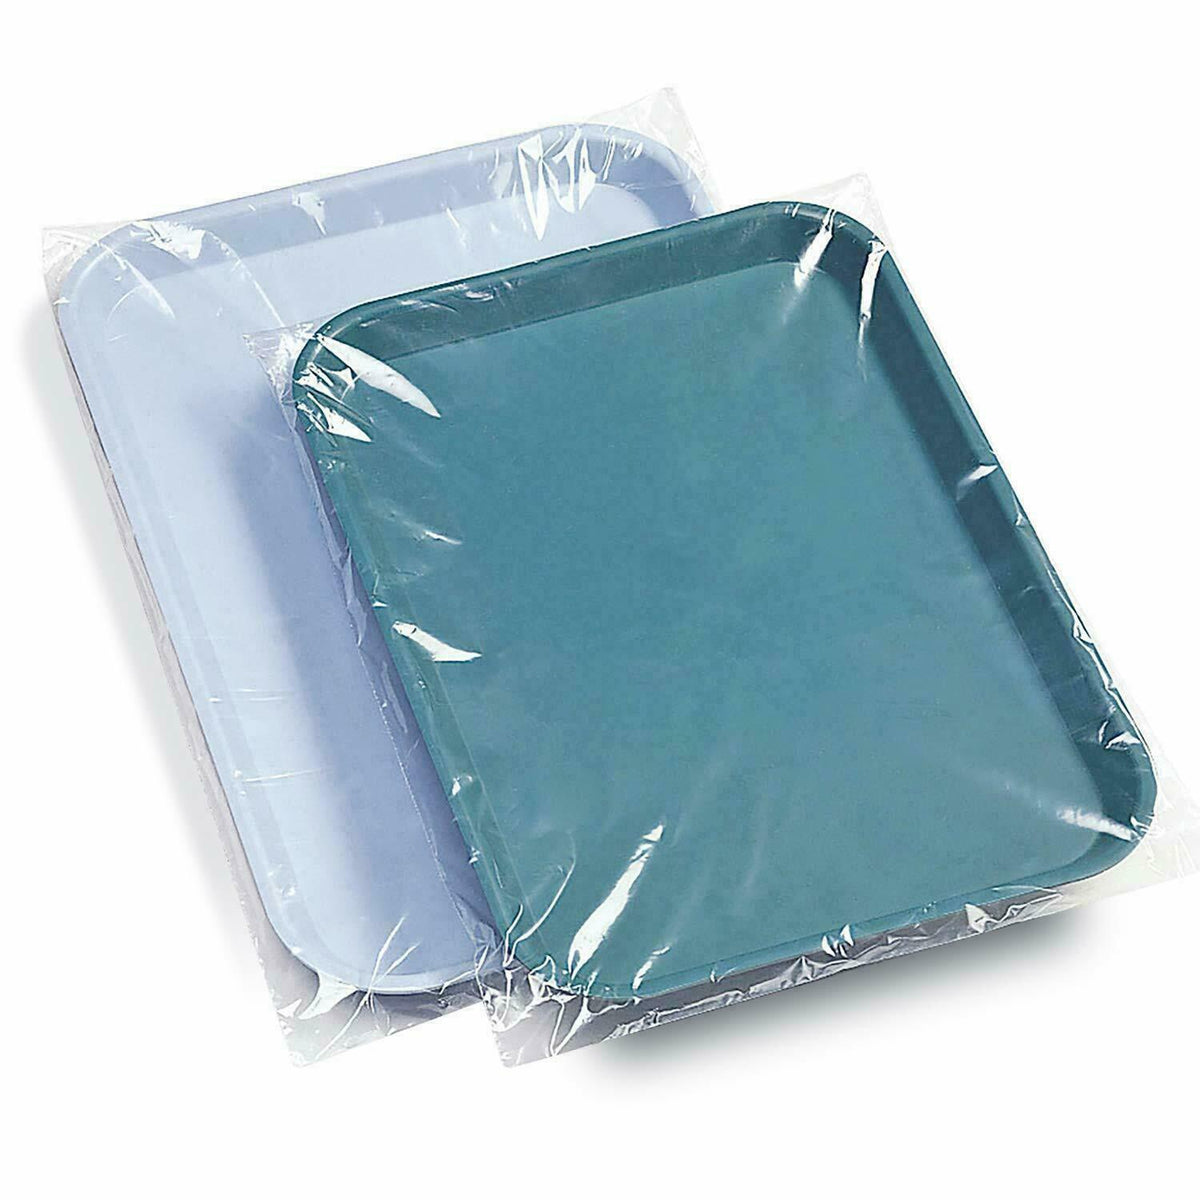 DUX Dental Introduces Tray Cover